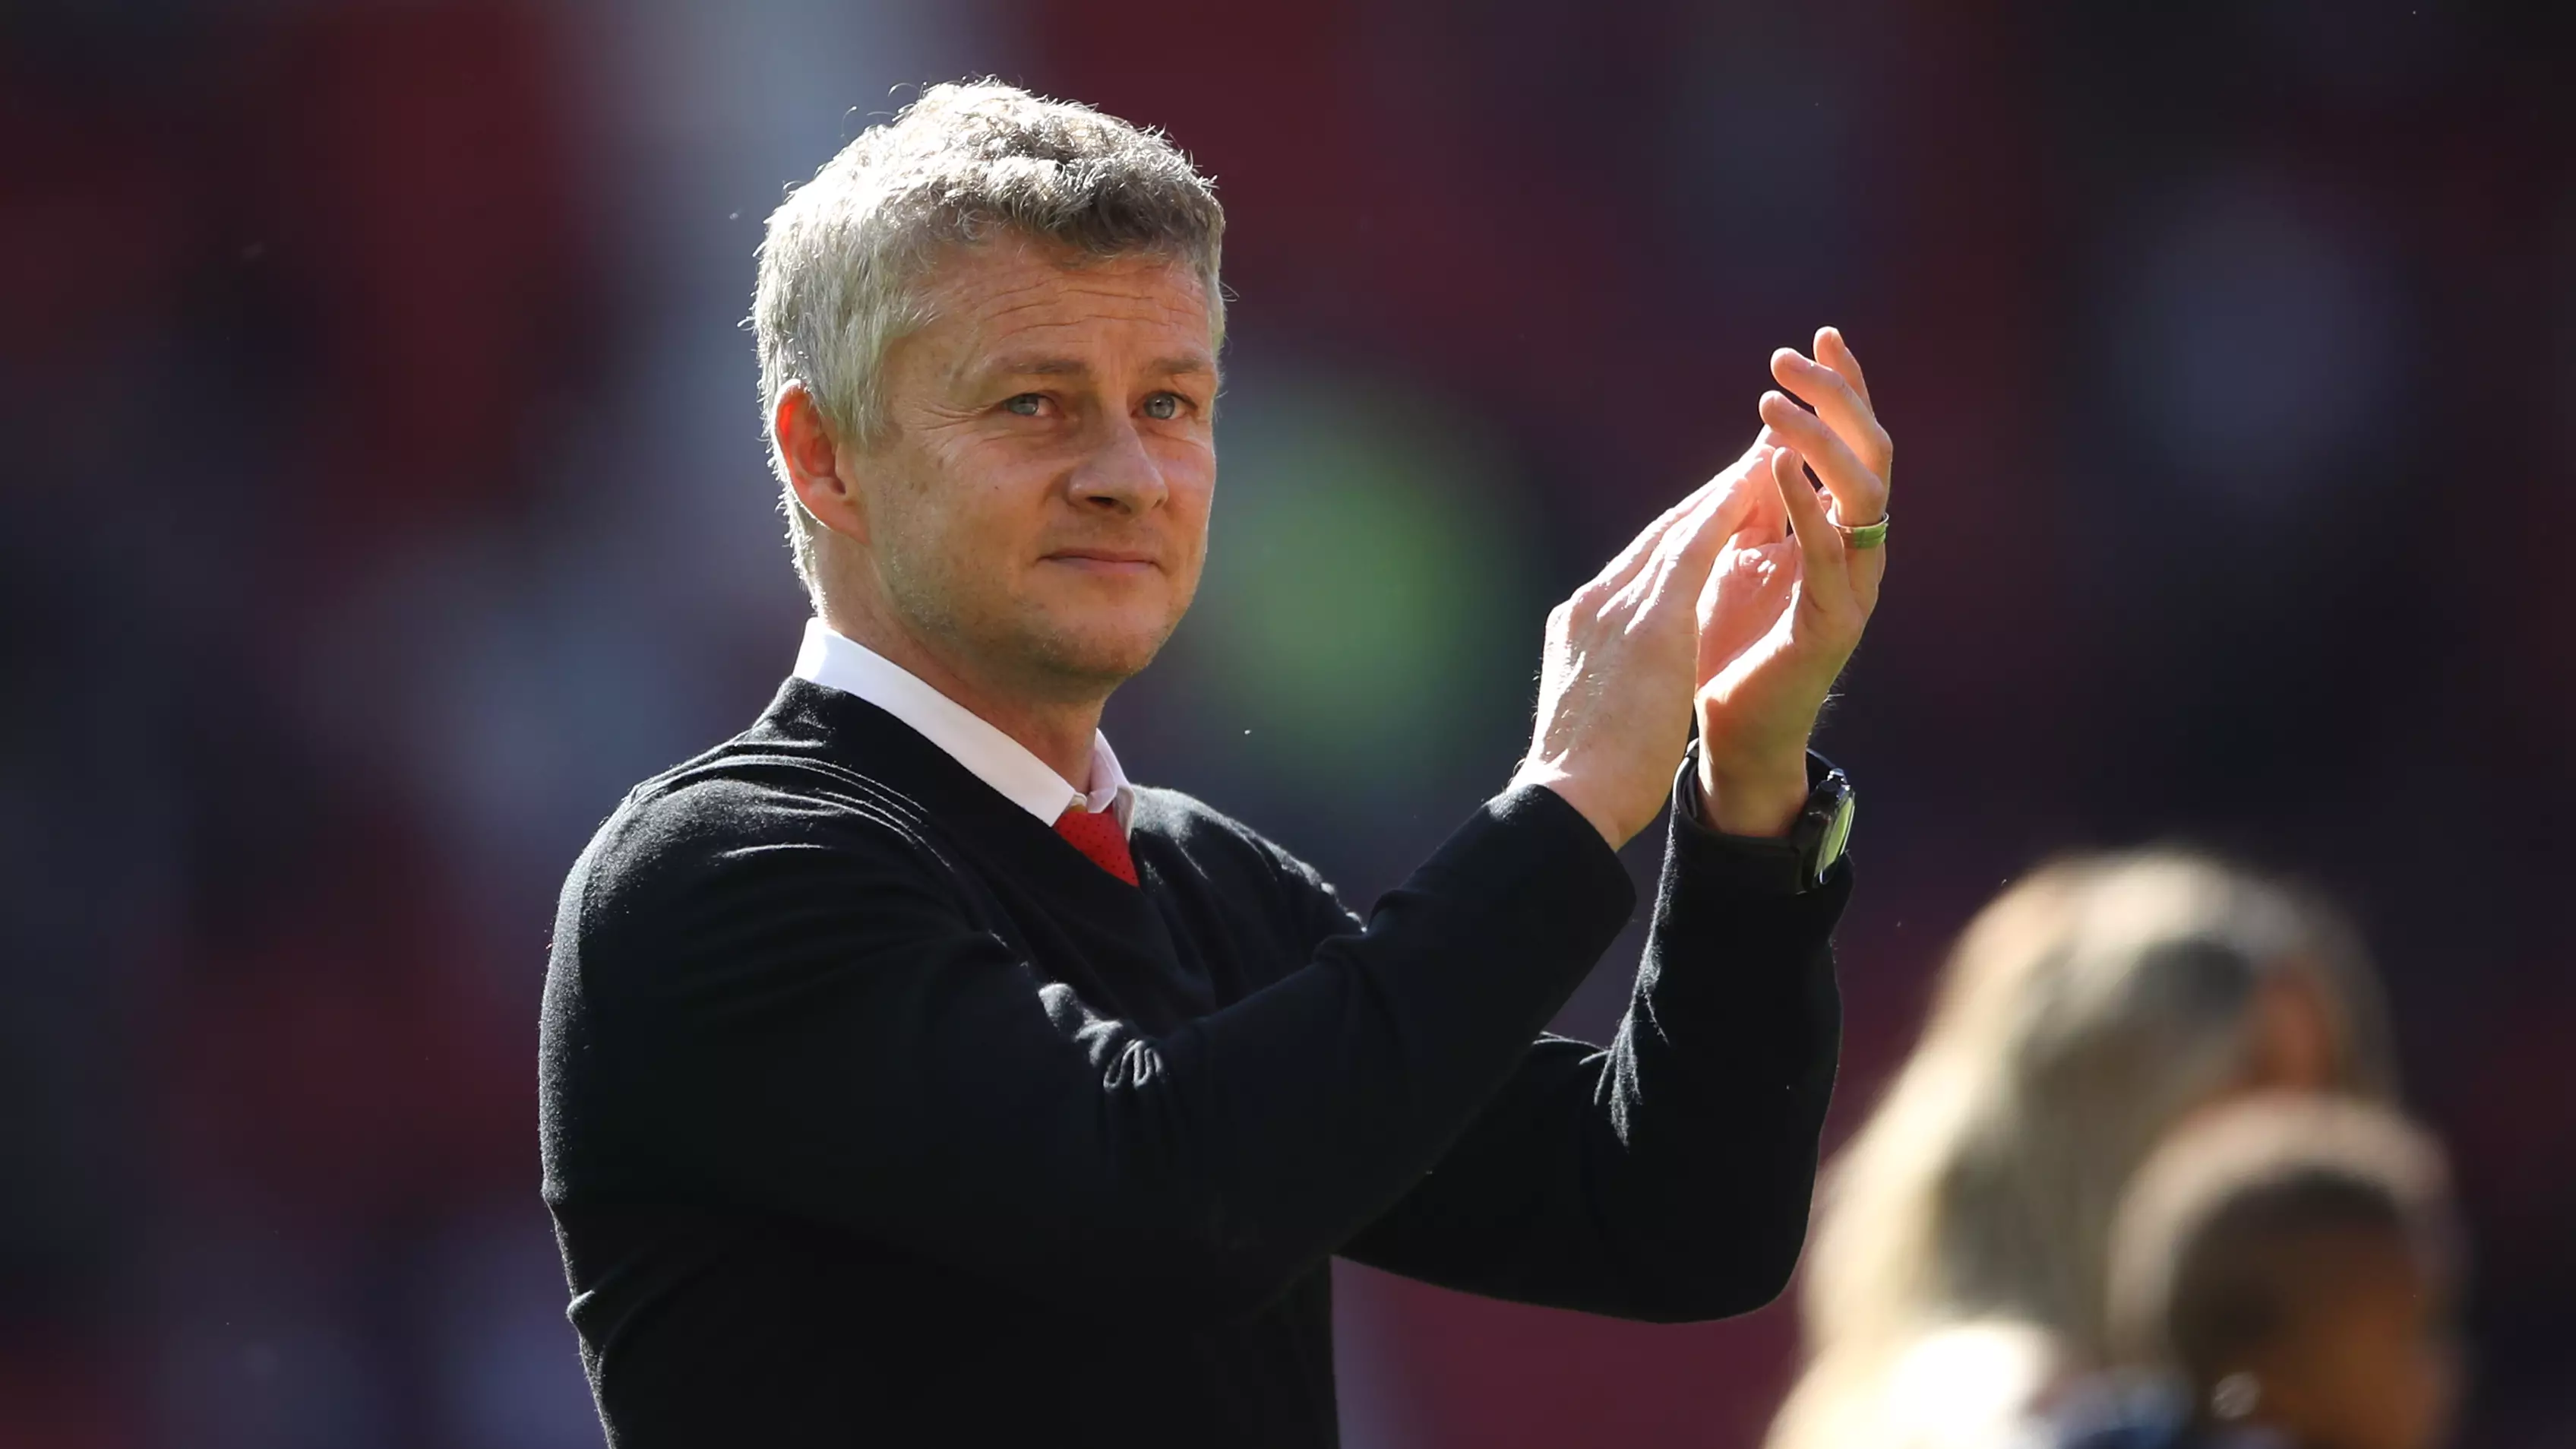 Ole Gunnar Solskjaer Has The Worst Win % Of Any Permanent Manchester United Boss